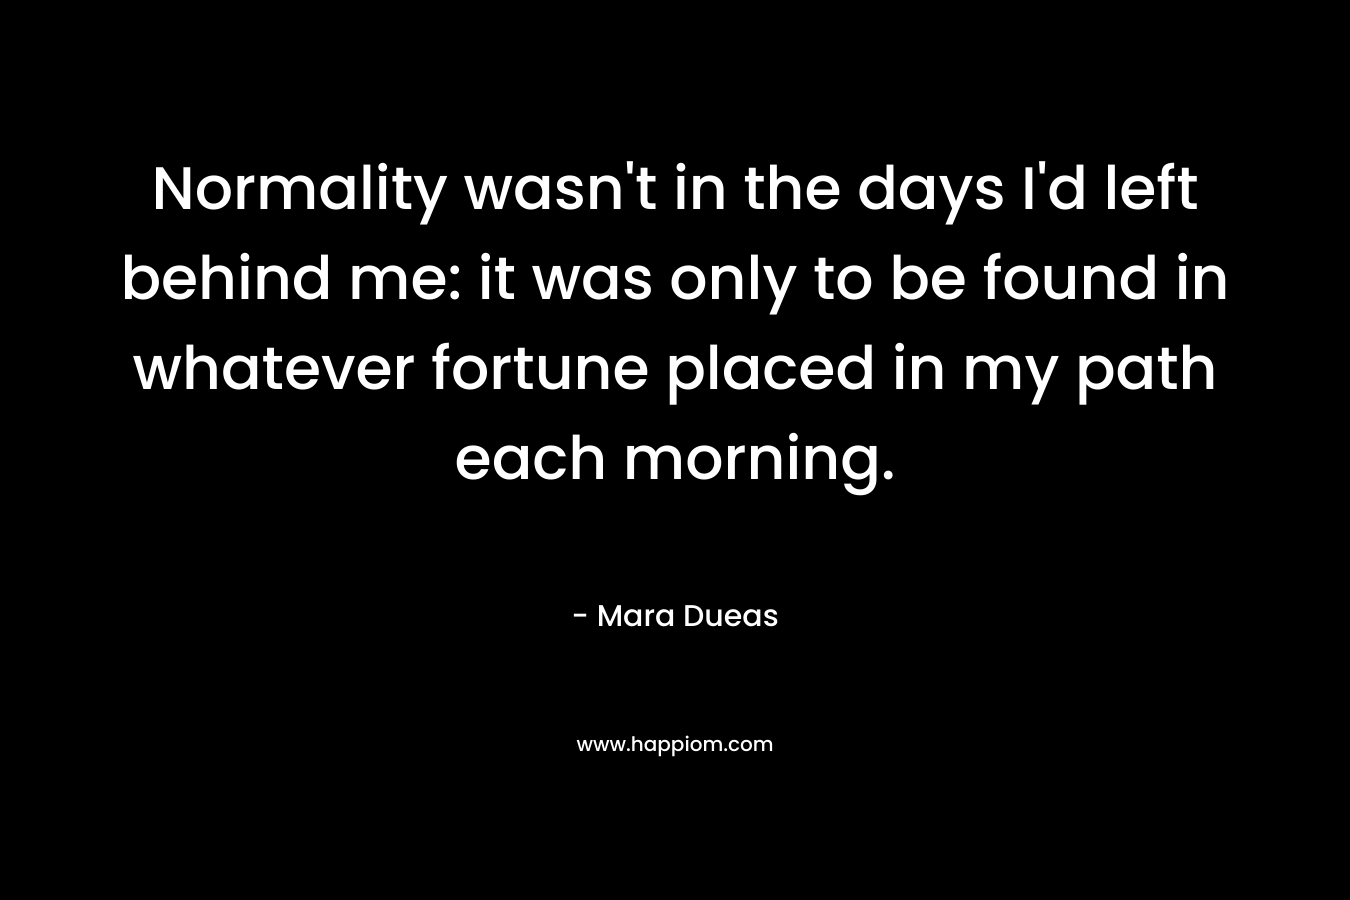 Normality wasn’t in the days I’d left behind me: it was only to be found in whatever fortune placed in my path each morning. – Mara Dueas